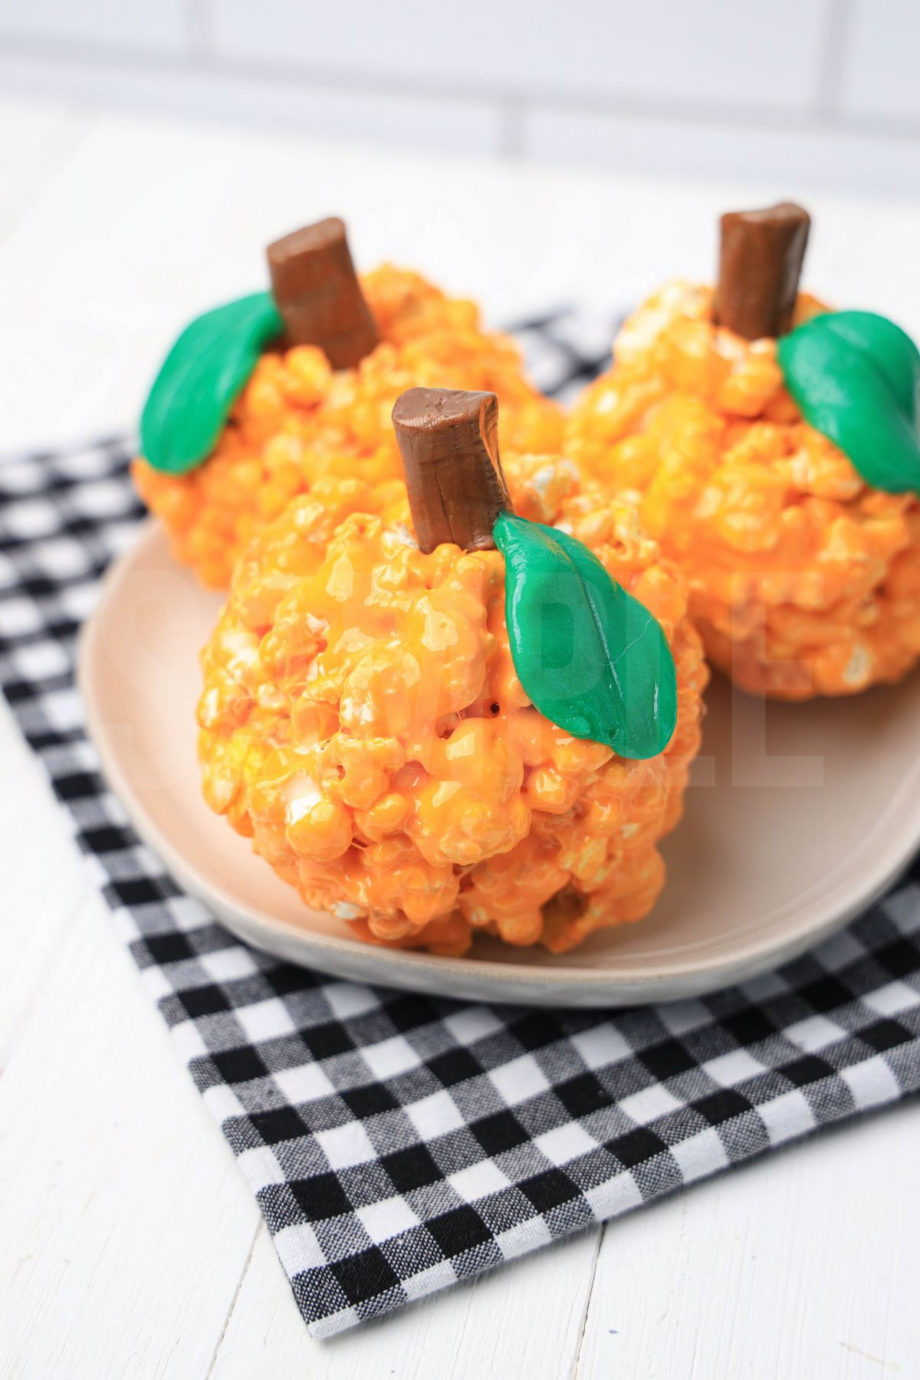 The Pumpkin Popcorn Balls comes on a white plate with a plaid napkin on a white wood backdrop.